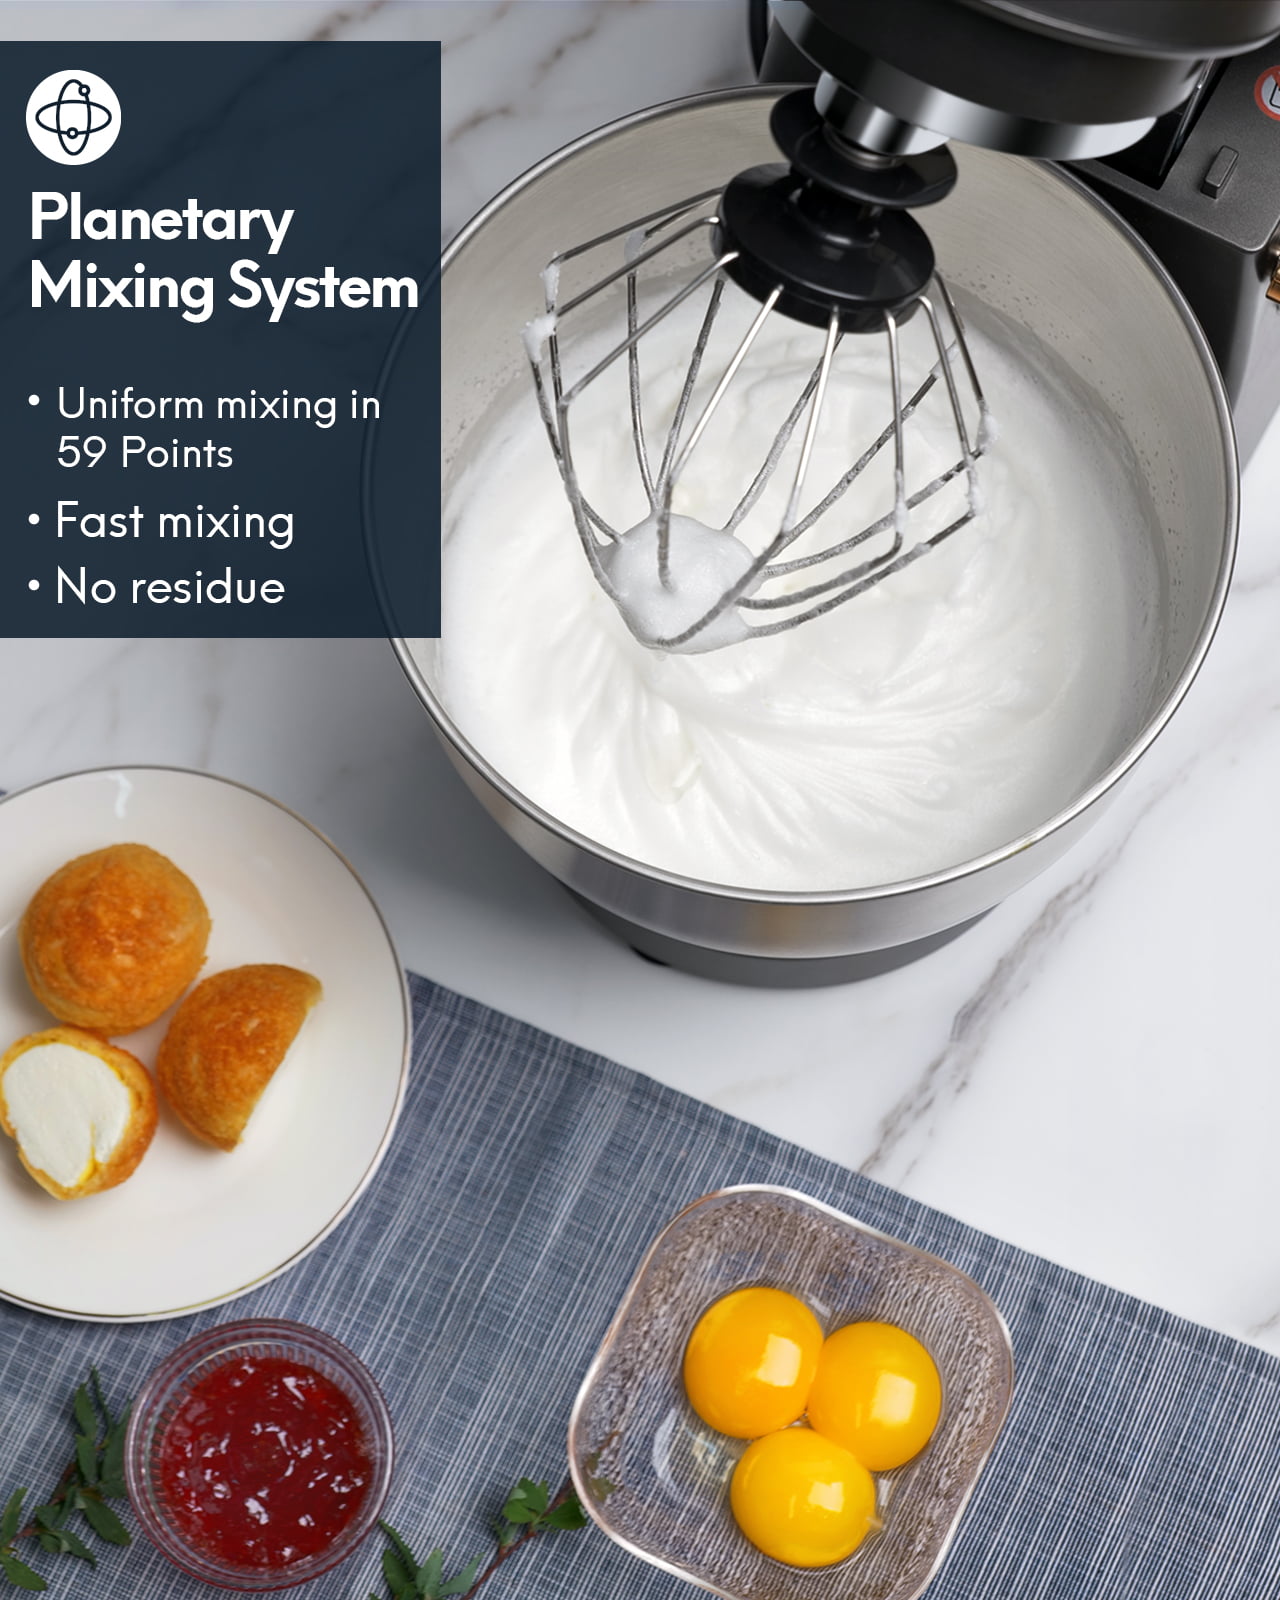 Whisk Splash Guard Dishwasher Safe Aukey Home 8+1-Speed Tilt-Head 600W Kitchen Electric Mixer with 5QT Stainless Steel Bowl,Planetary Mixing System Stand Mixer Flat Beater Dough Hook Grey 